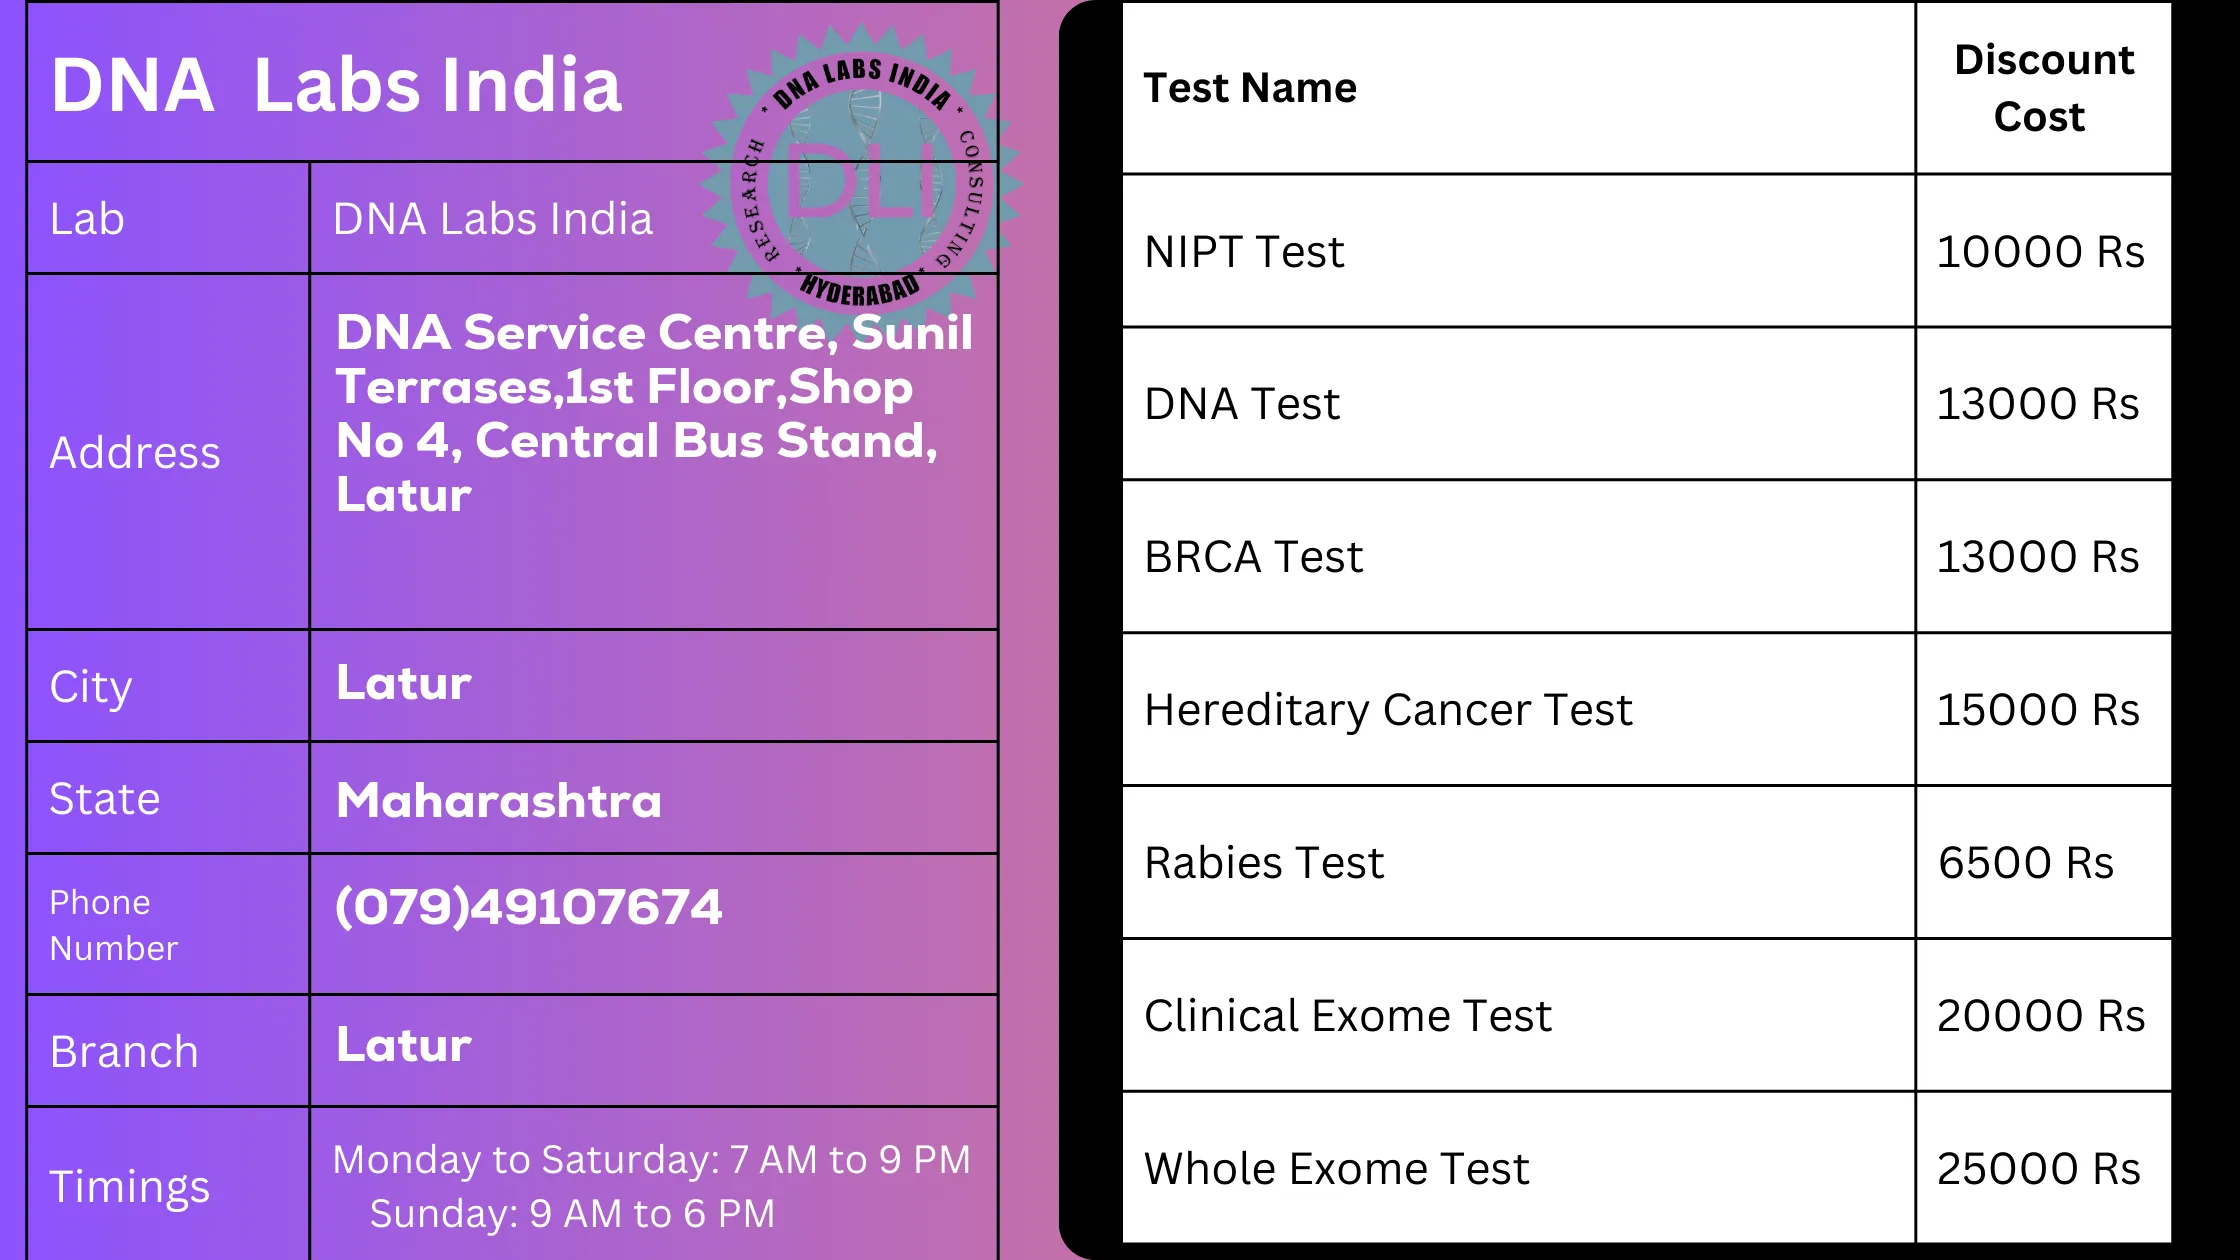 DNA Labs India in Latur: Offering 20% Discount on Tests